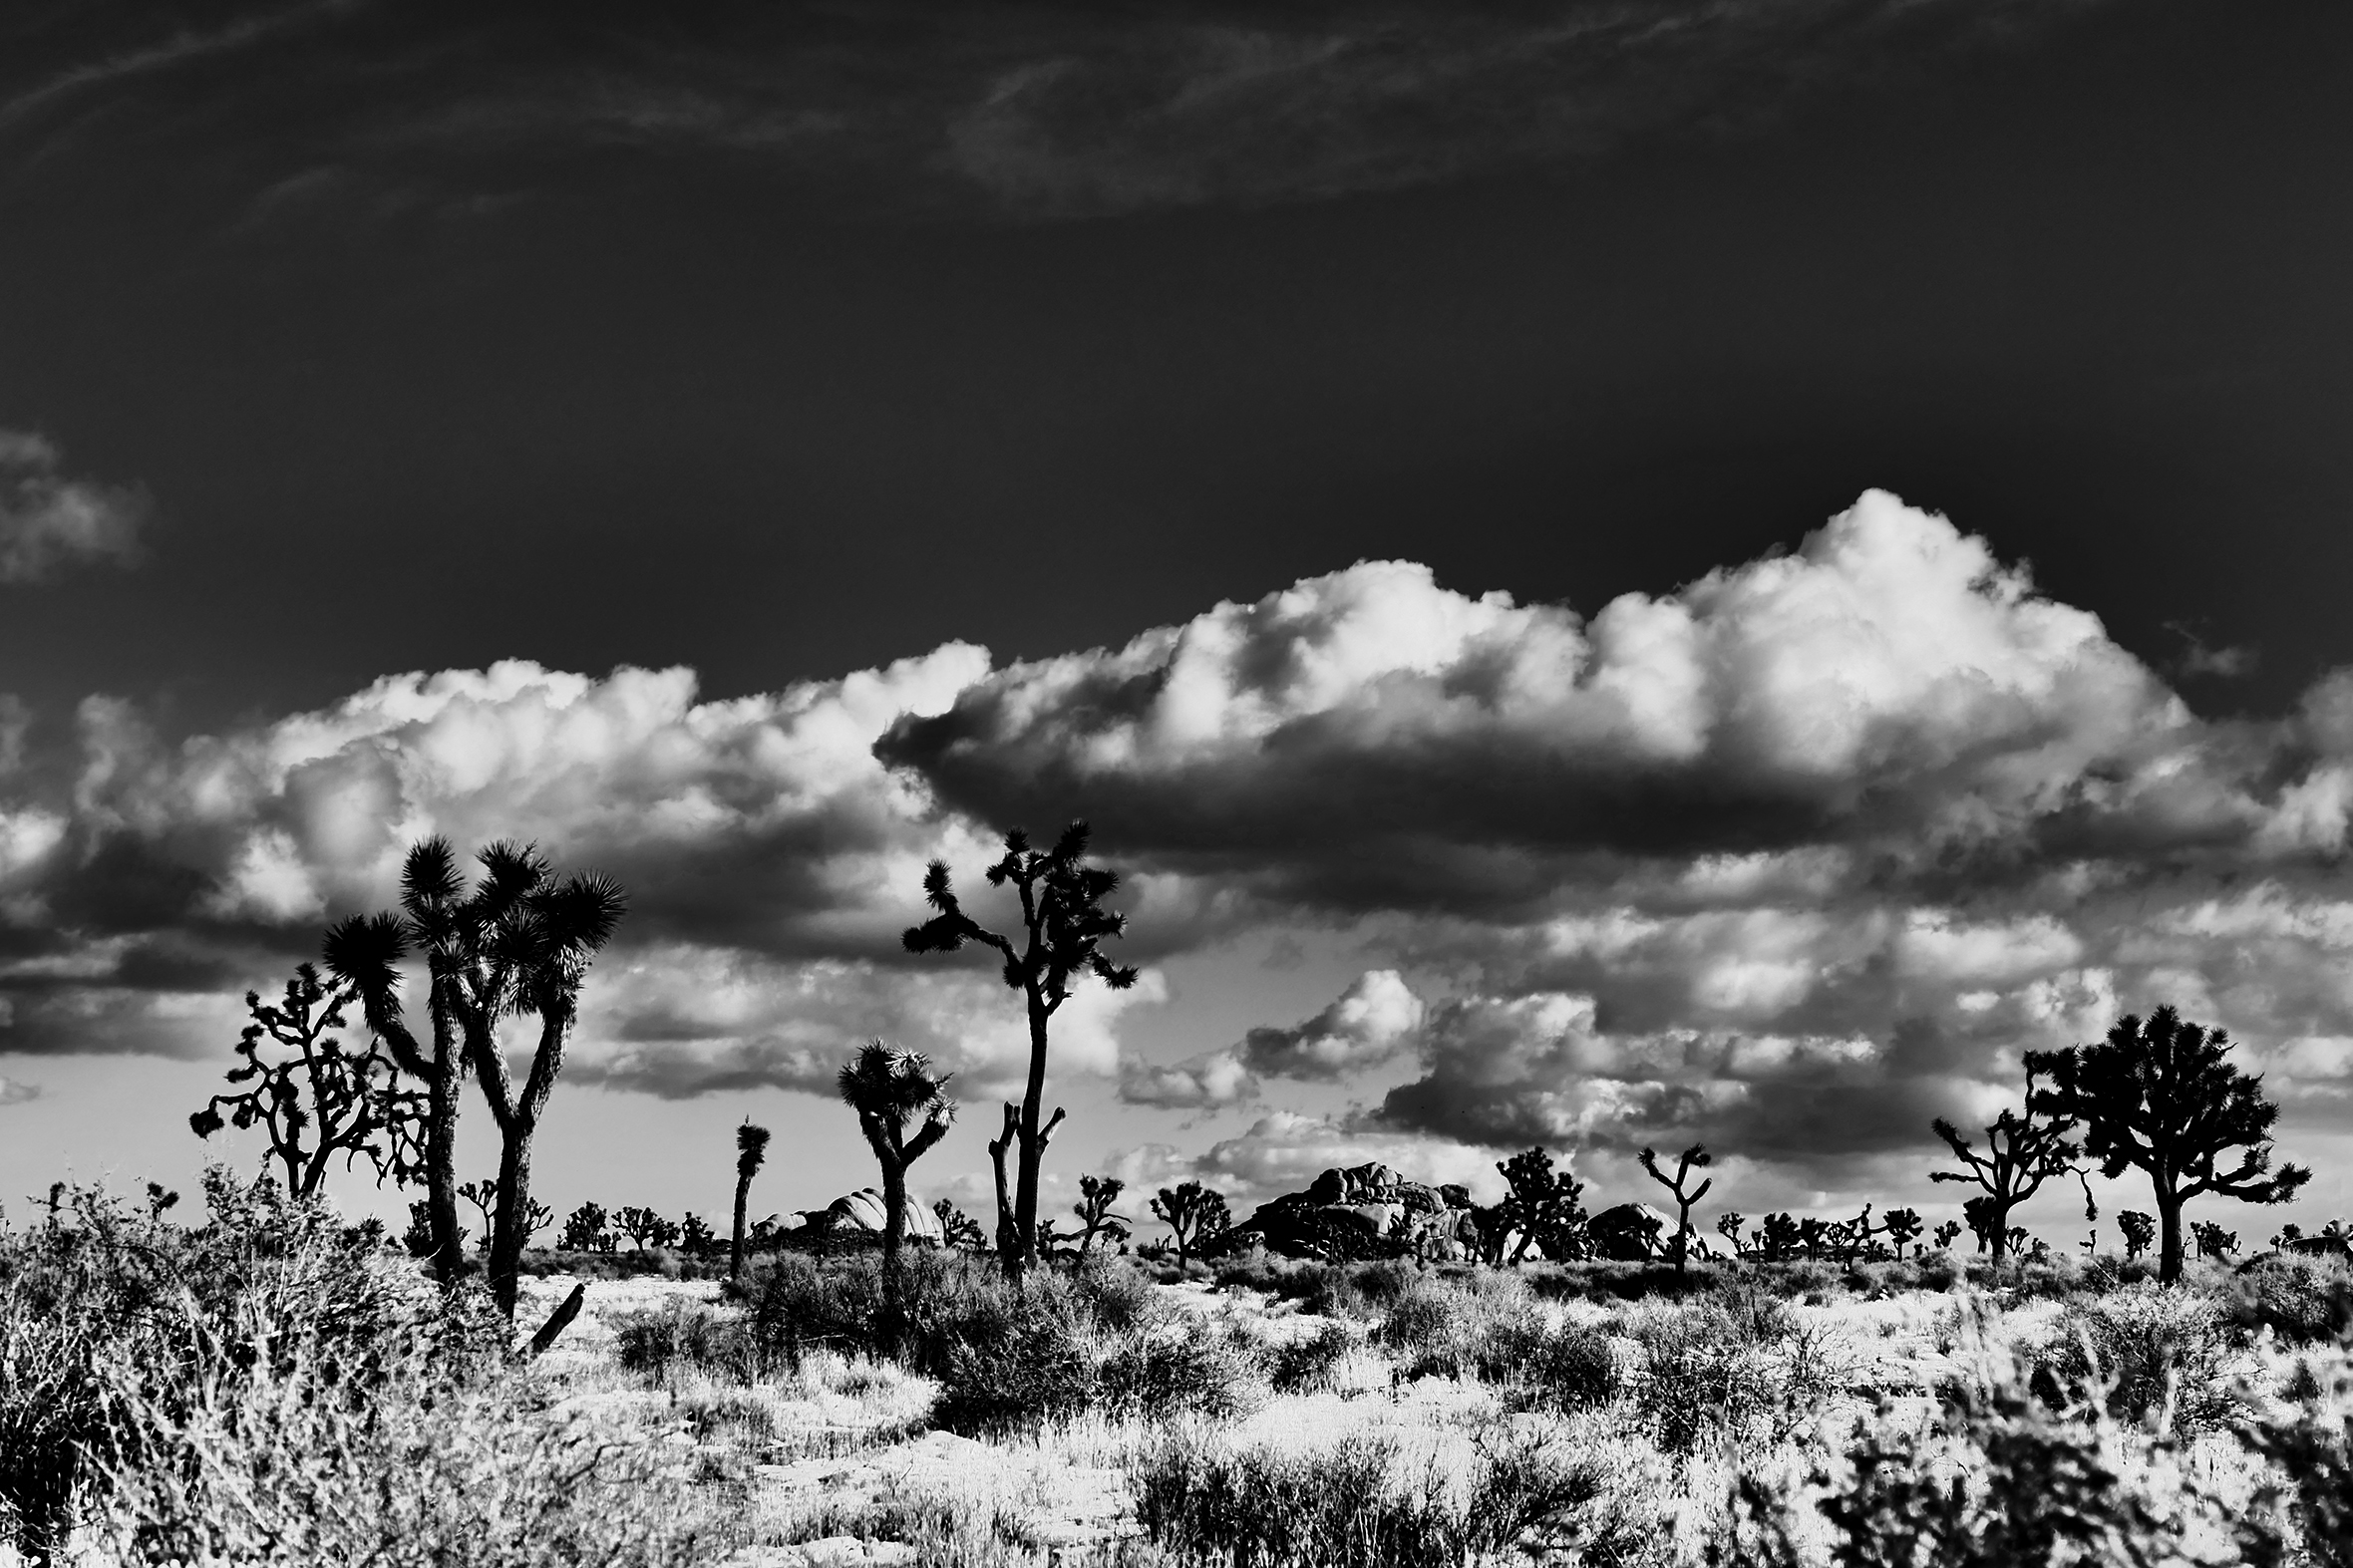 A desert landscape with sparse trees and vegetation and a few low clouds.